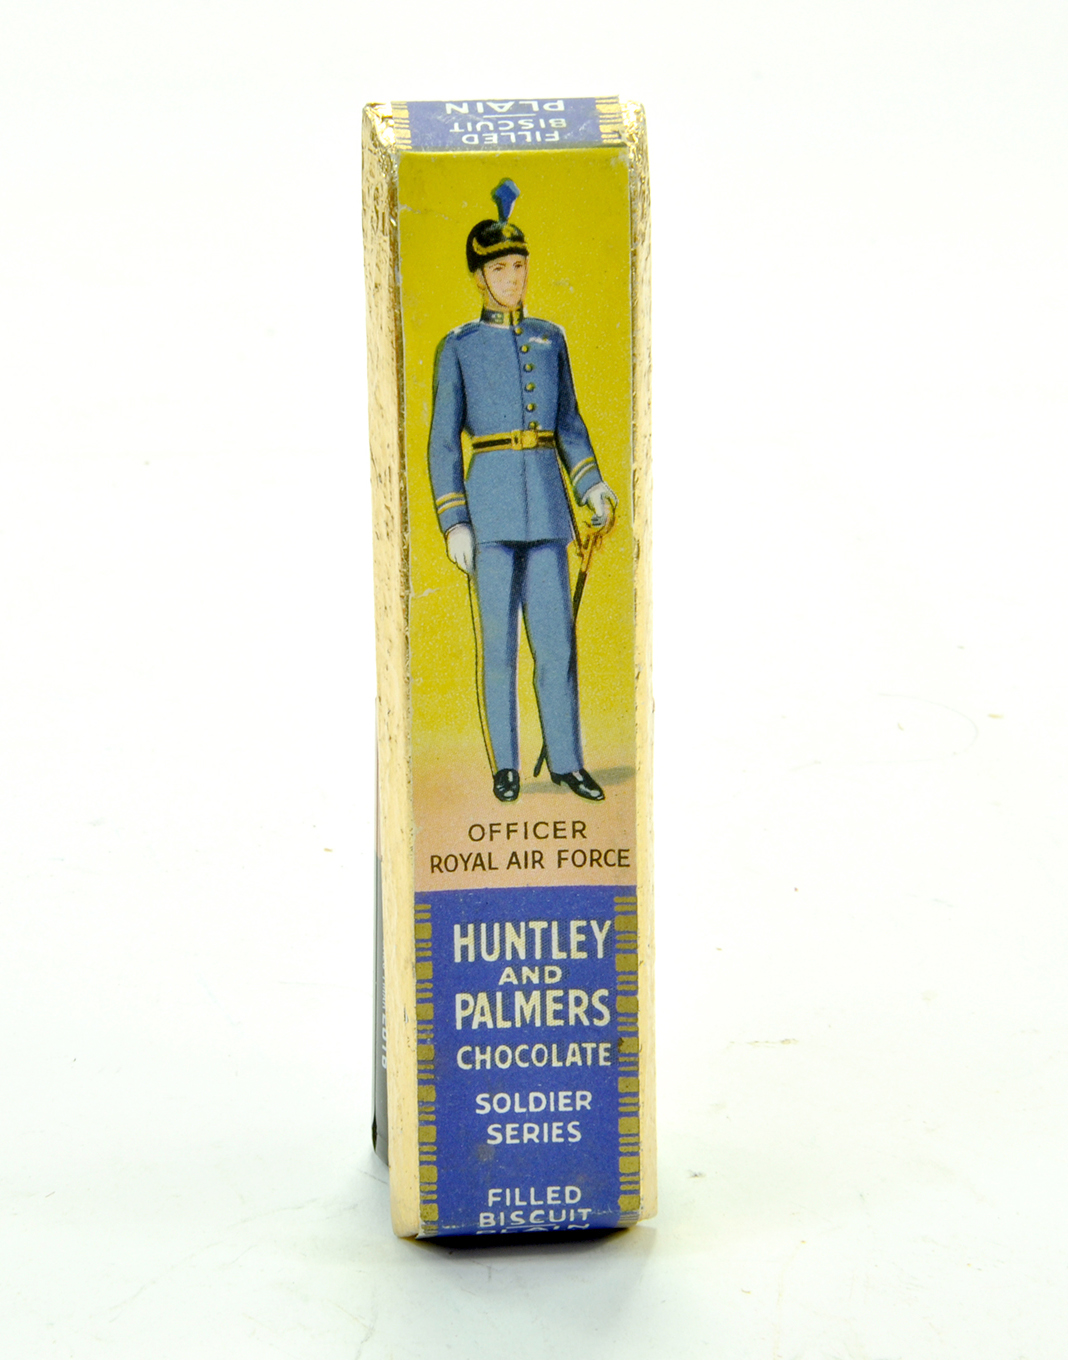 An incredibly scarce original unopened Huntley and Palmers Chocolate Soldier Series Filled